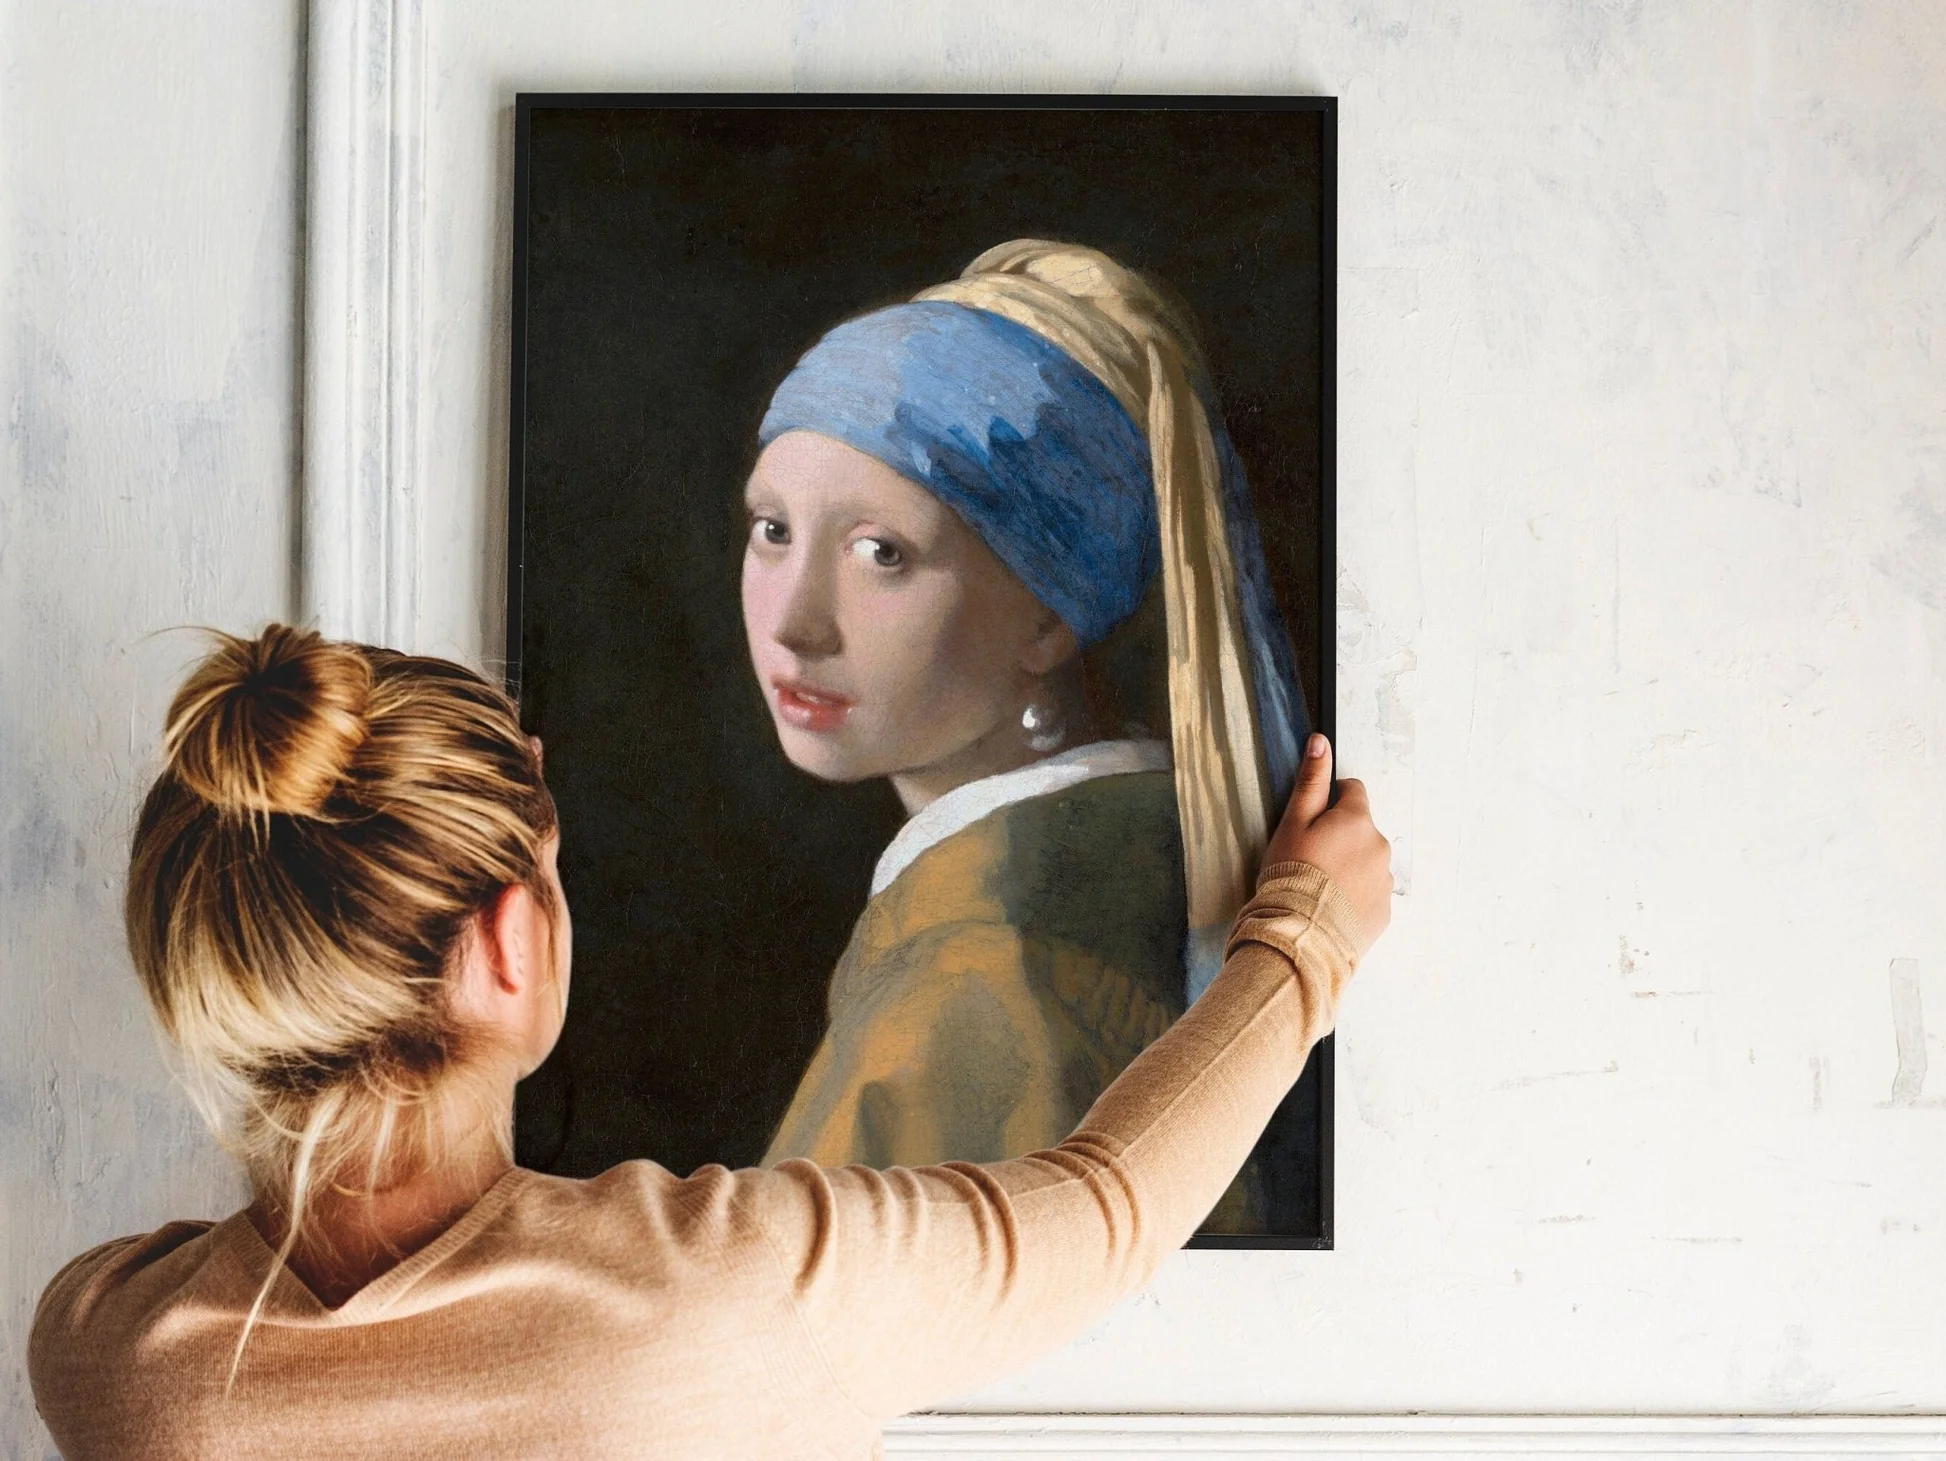 Let’s Explore Painting “Girl with a Pearl Earring” – Johannes Vermeer